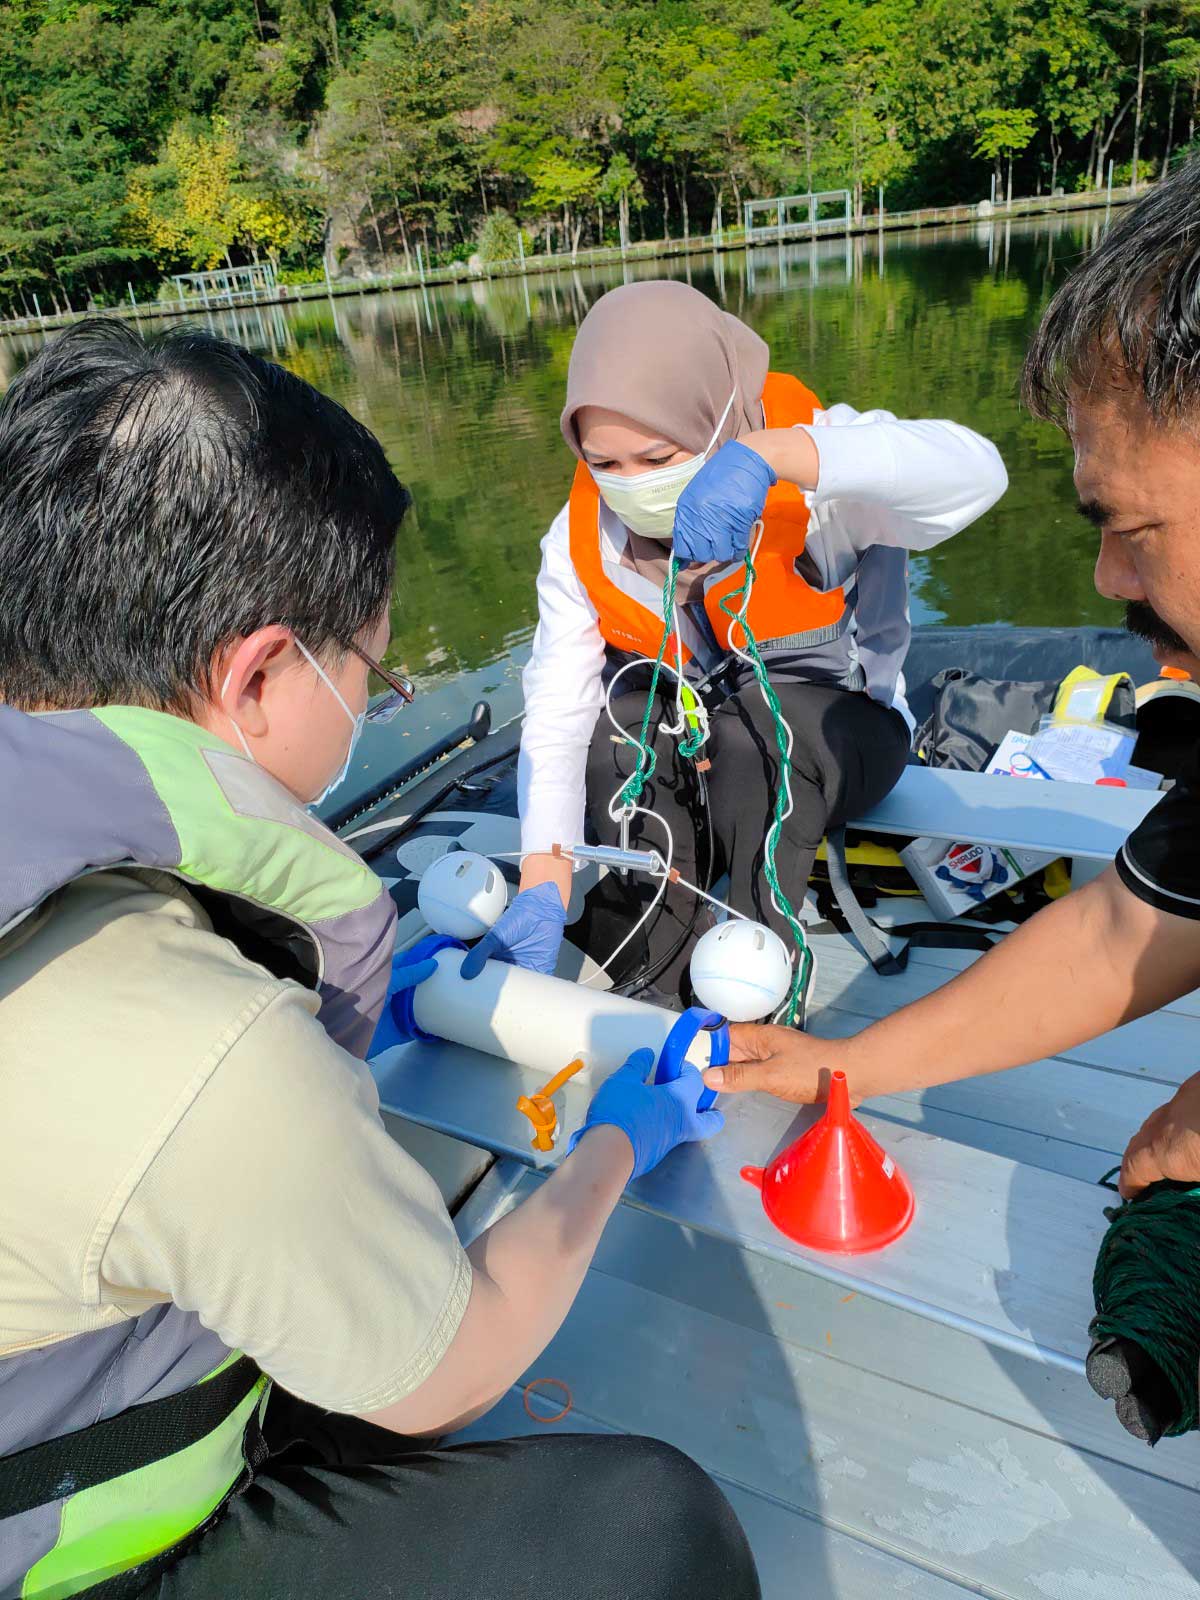 Dr. Chen and his team at Sunway South Quay lake doing water sampling for water quality research.